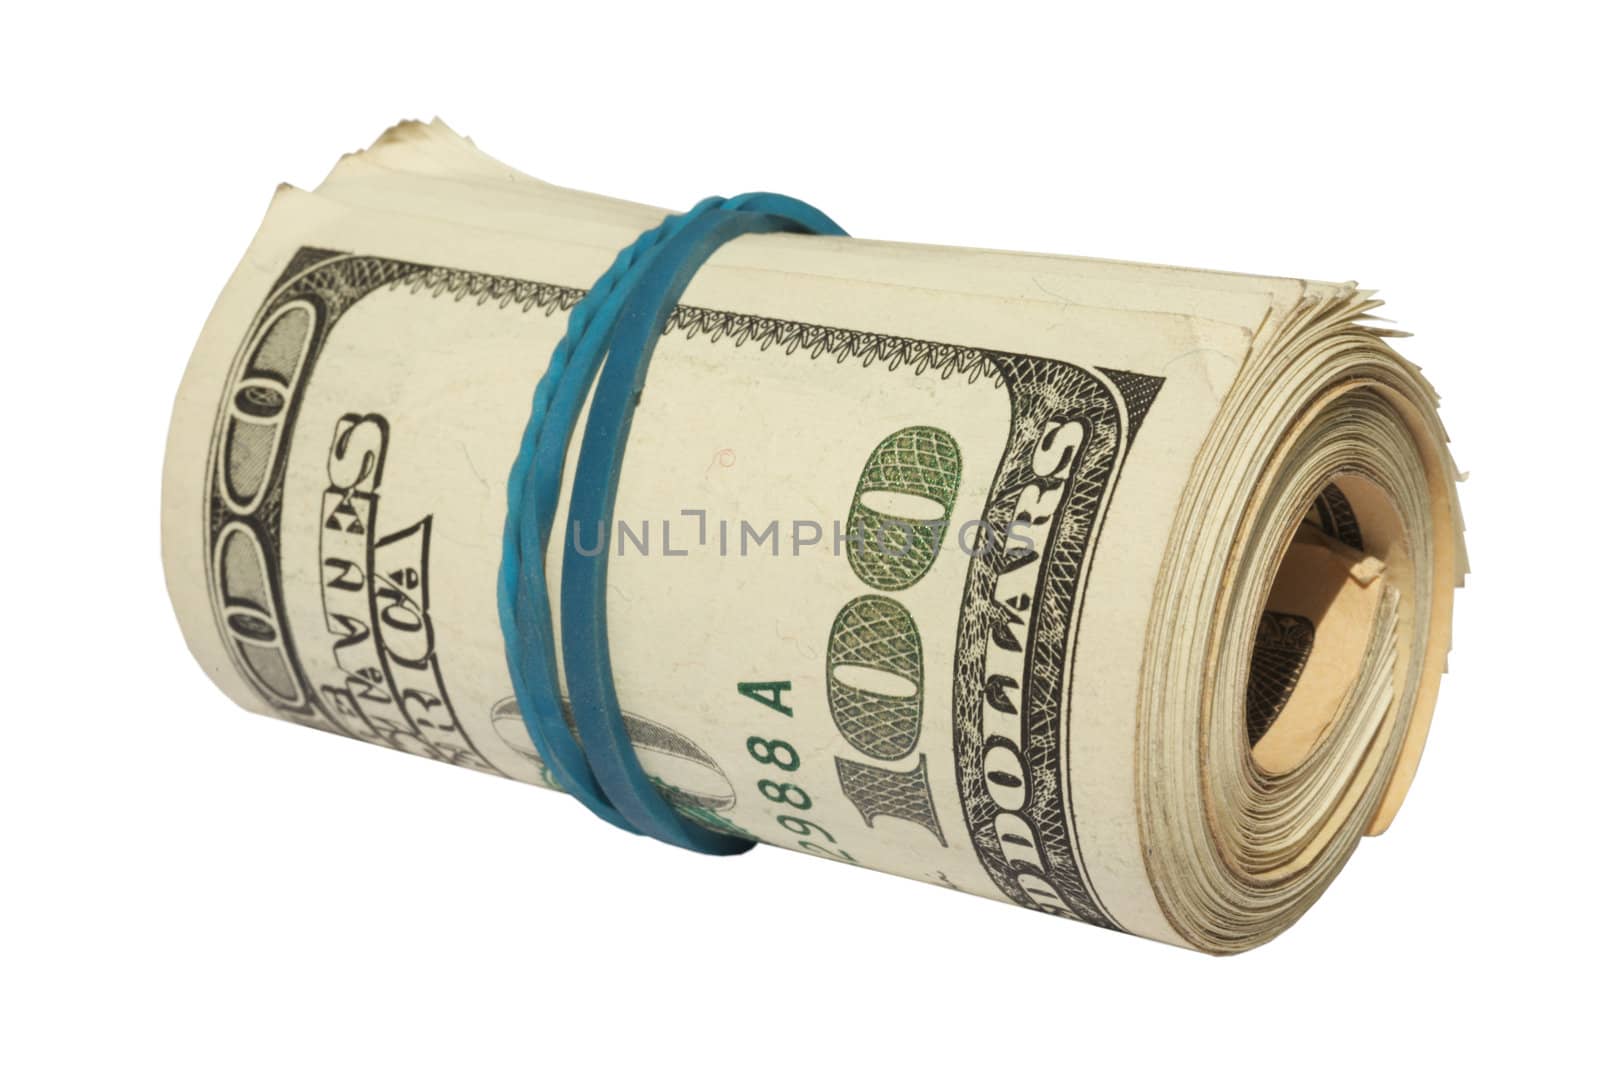 Roll of the dollars which have been tied up by a dark blue tape